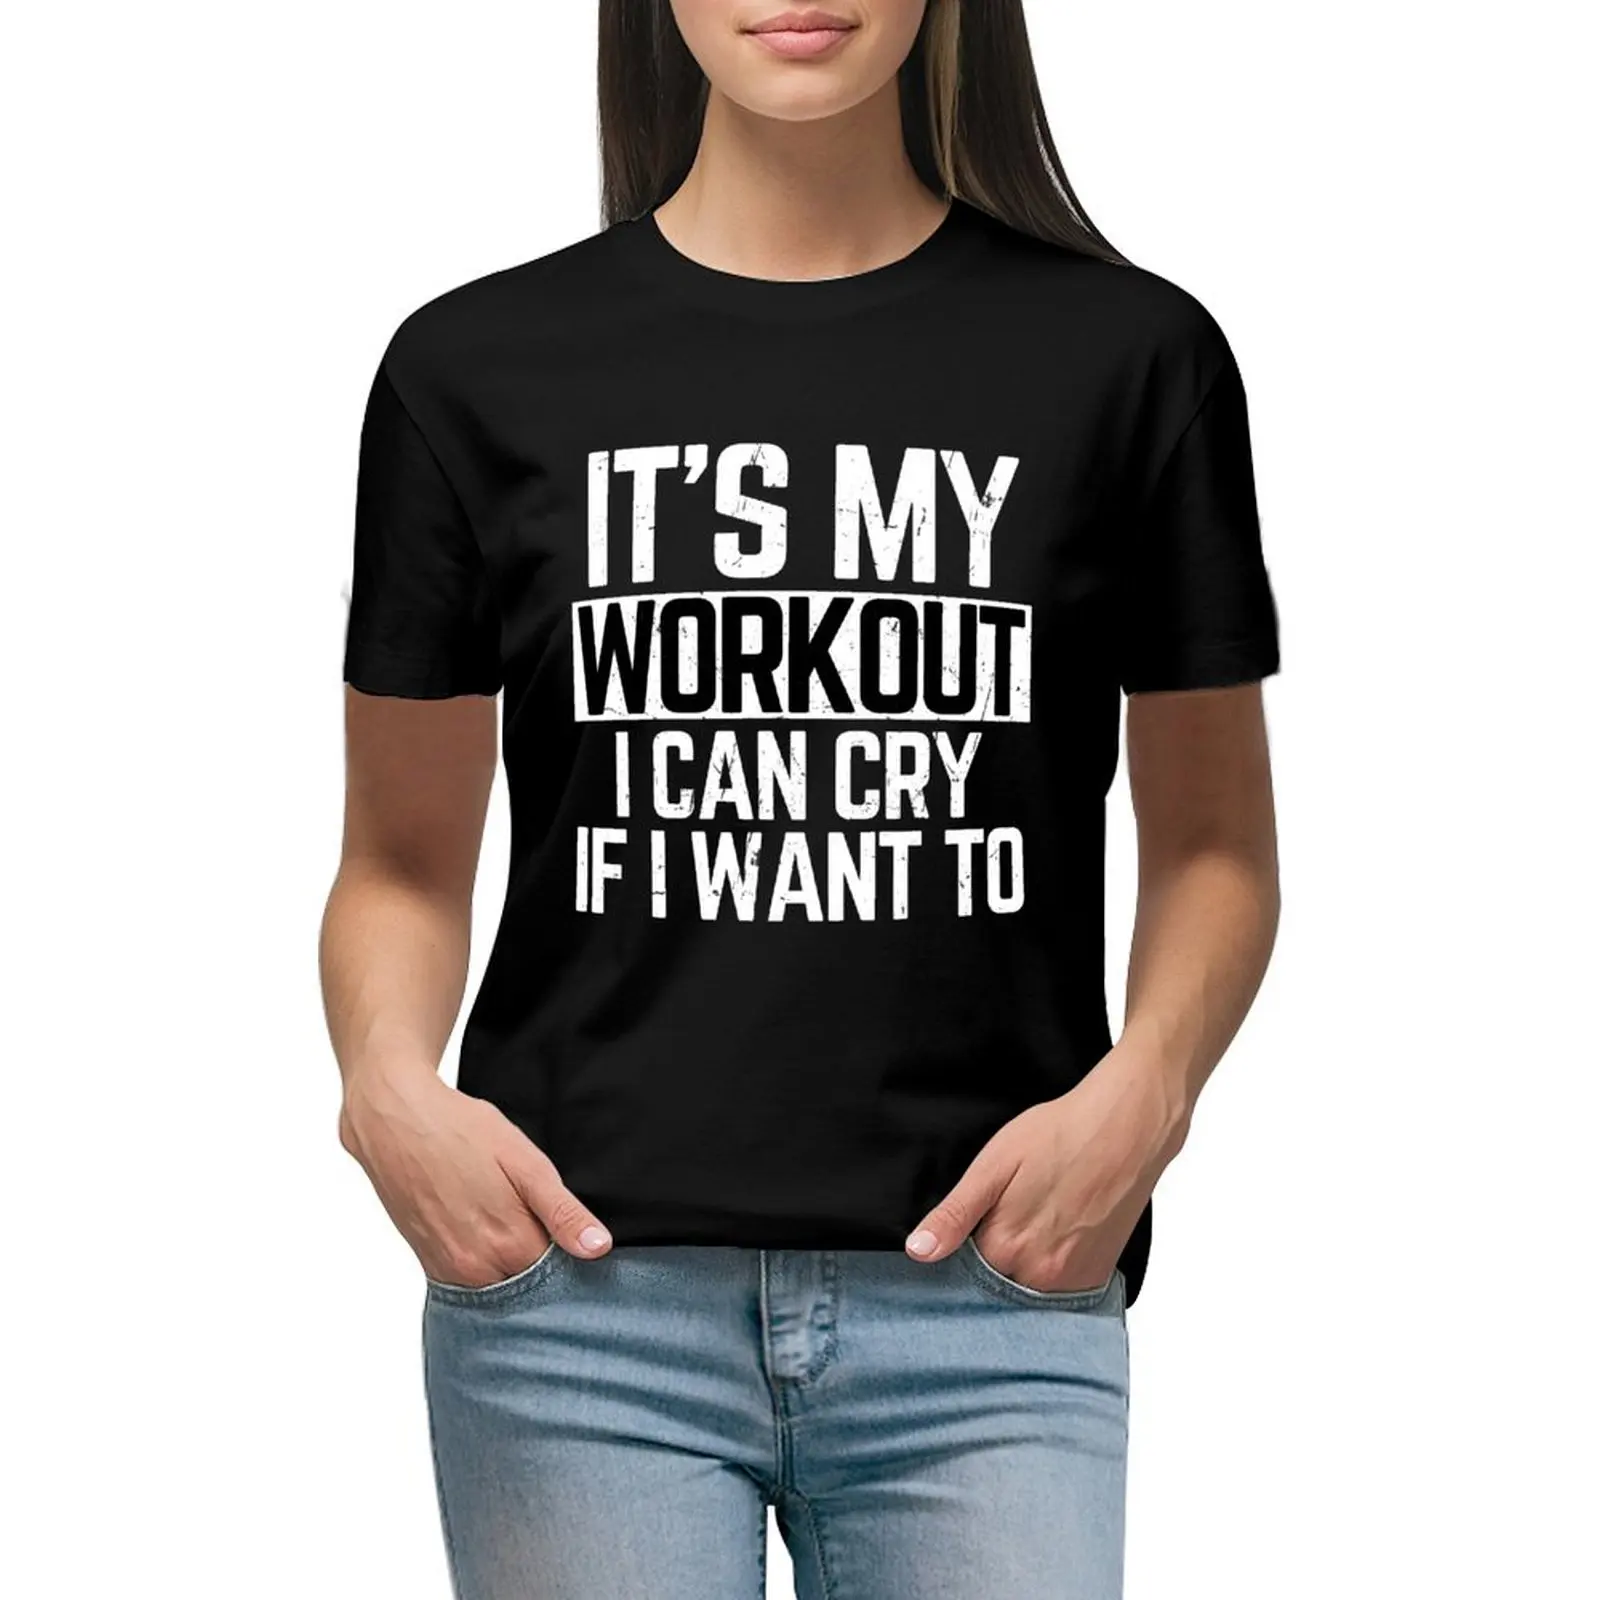 

It's My Workout I Can Cry If I Want To Funny Gym T-shirt summer clothes Female clothing workout shirts for Women